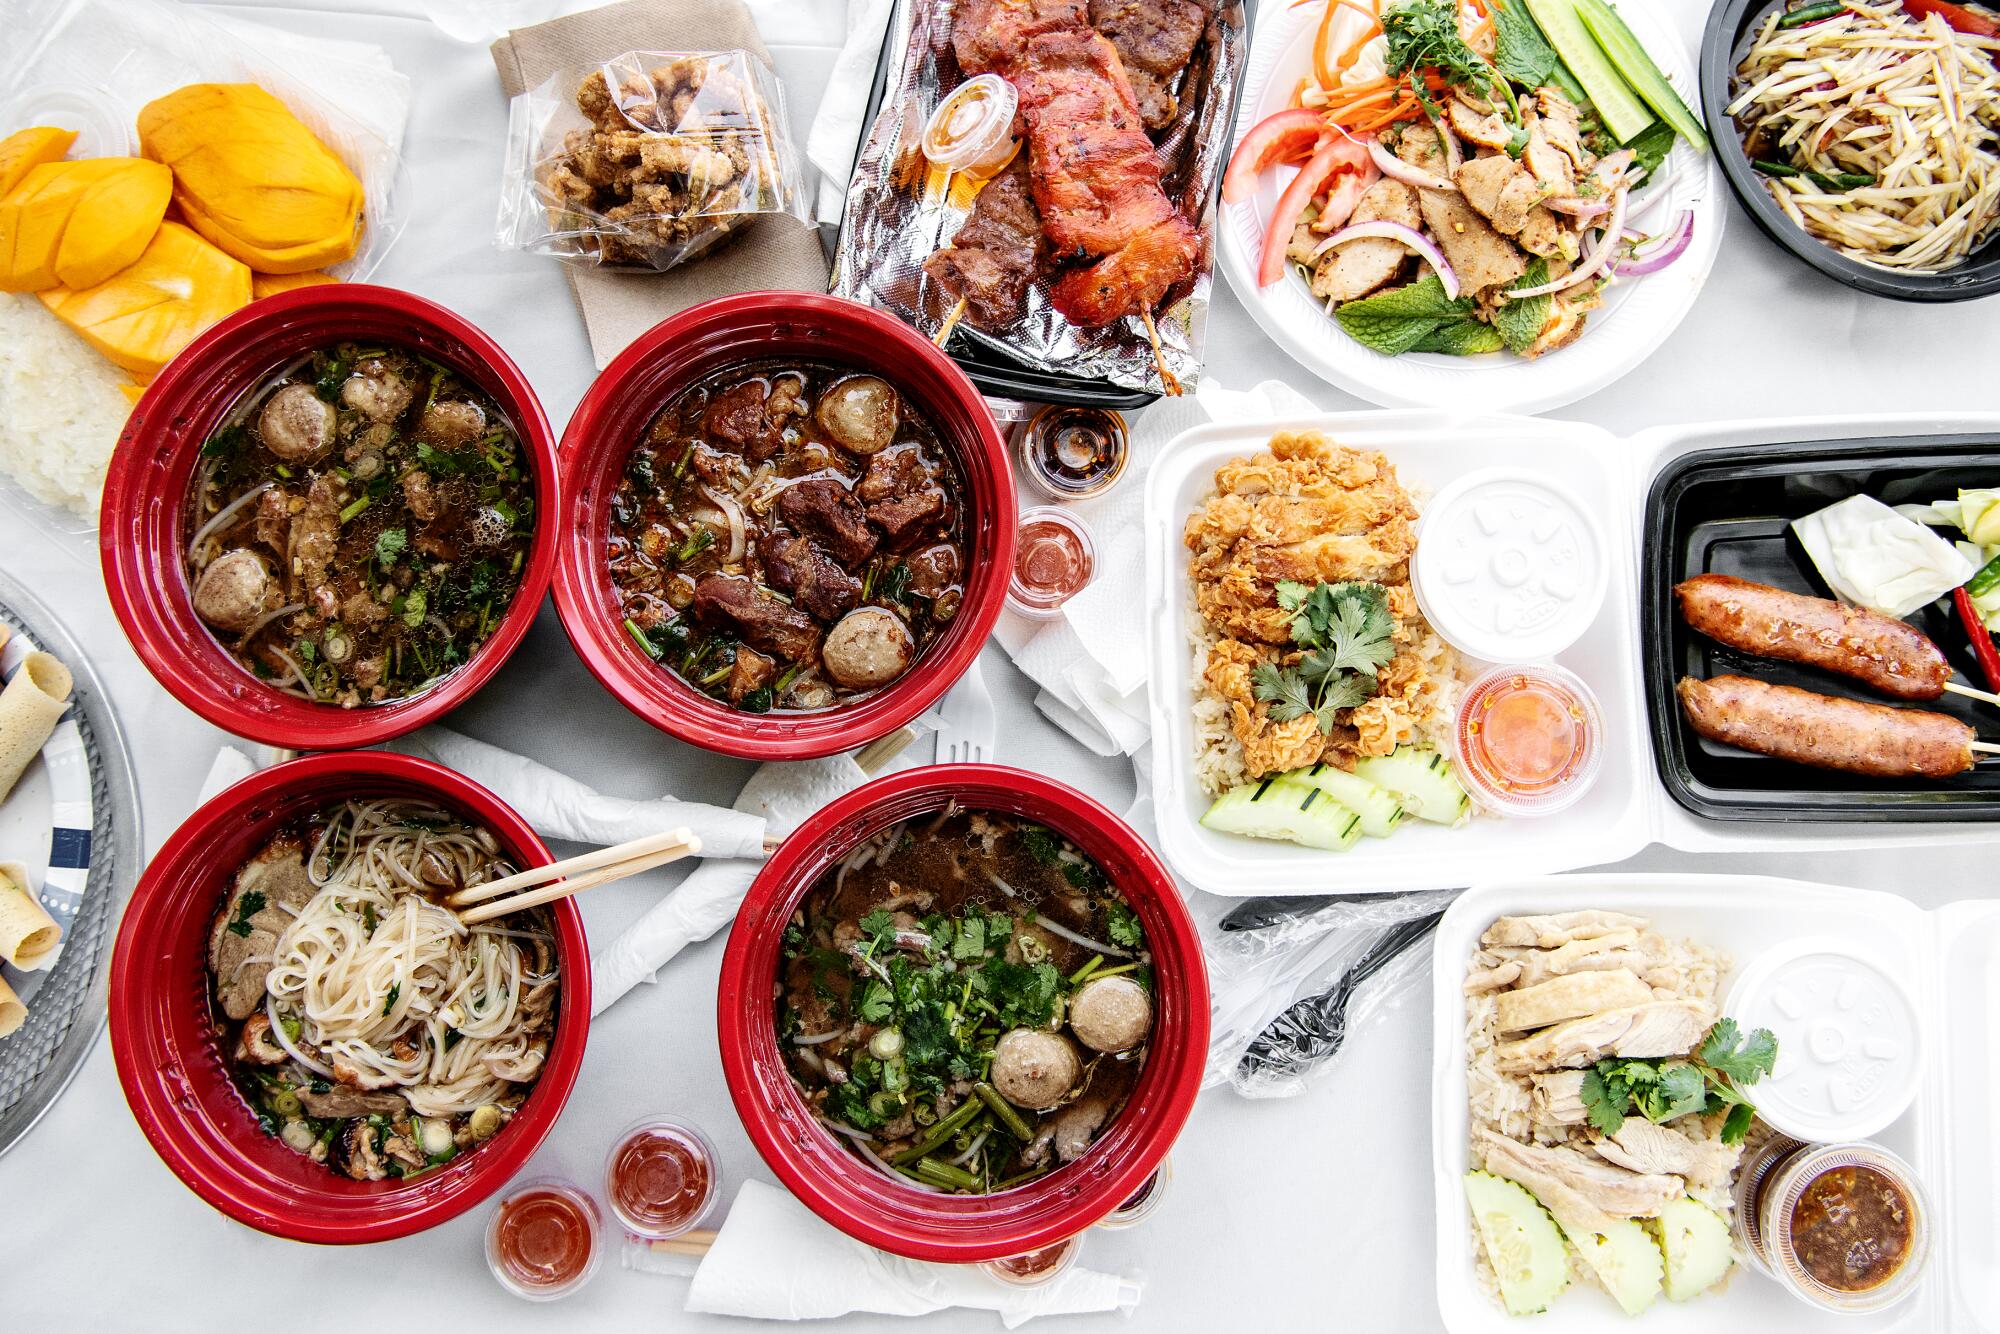 An array of Thai dishes available at a food market.